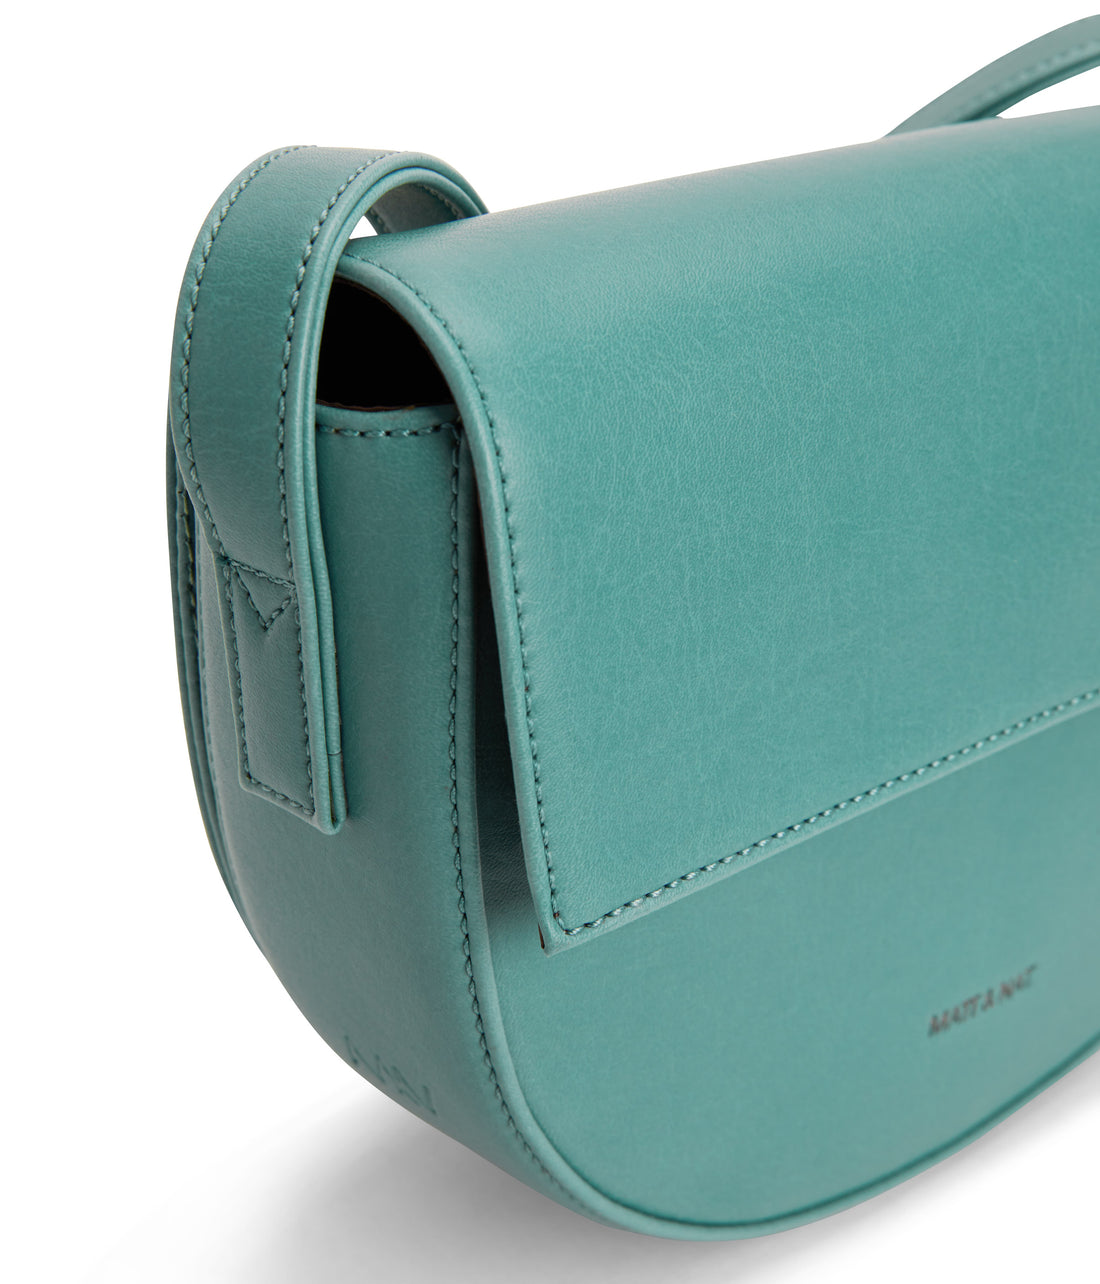 Saddle bag with adjustable strap, flap with magnetic snap closure at main compartment, and a back gusseted zipper compartment.